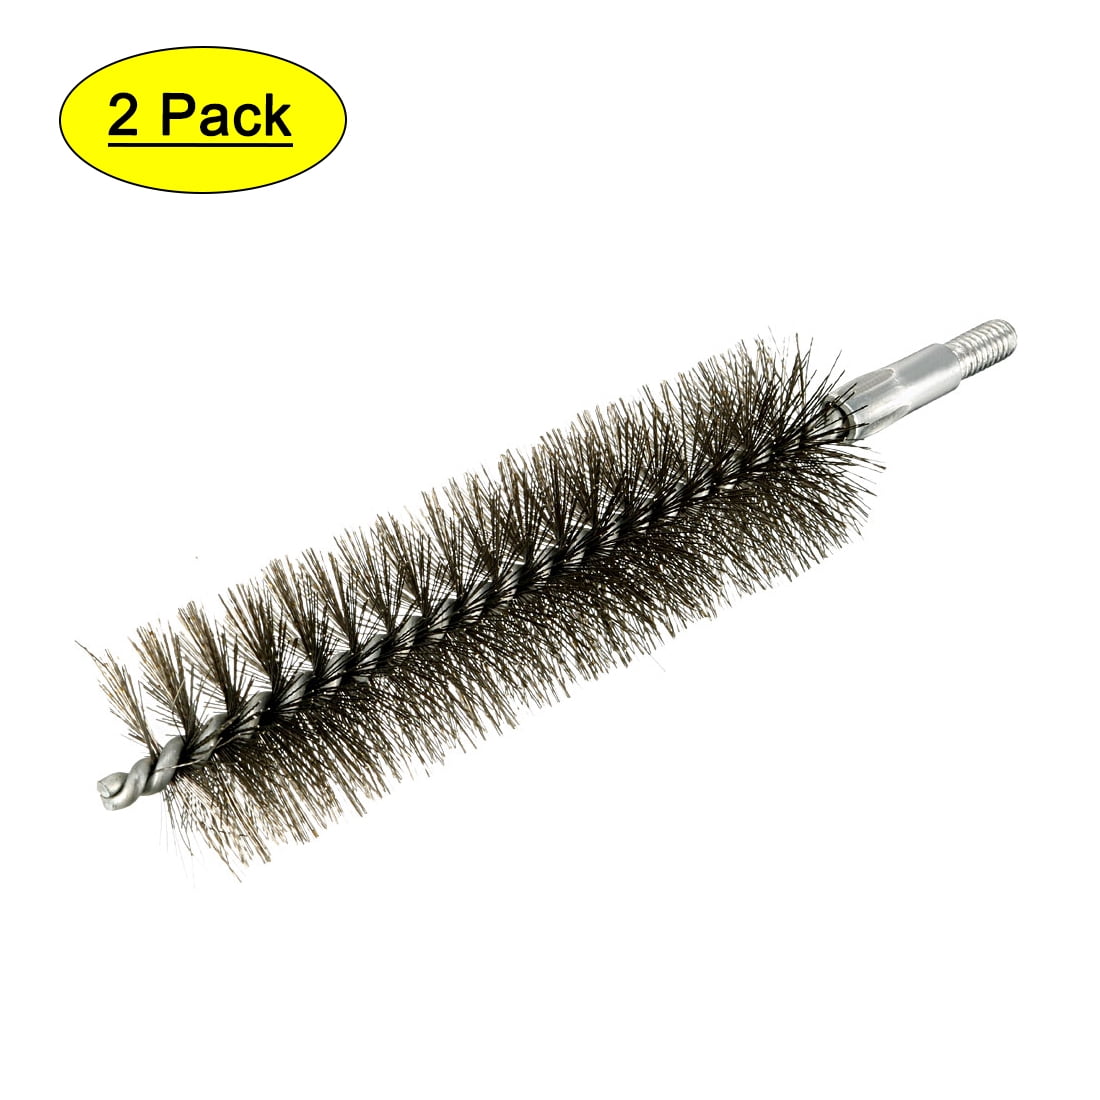 New 16410 RUTLAND 10" Round Spring Wire Chimney Sweep Soot Cleaning Brush Black 